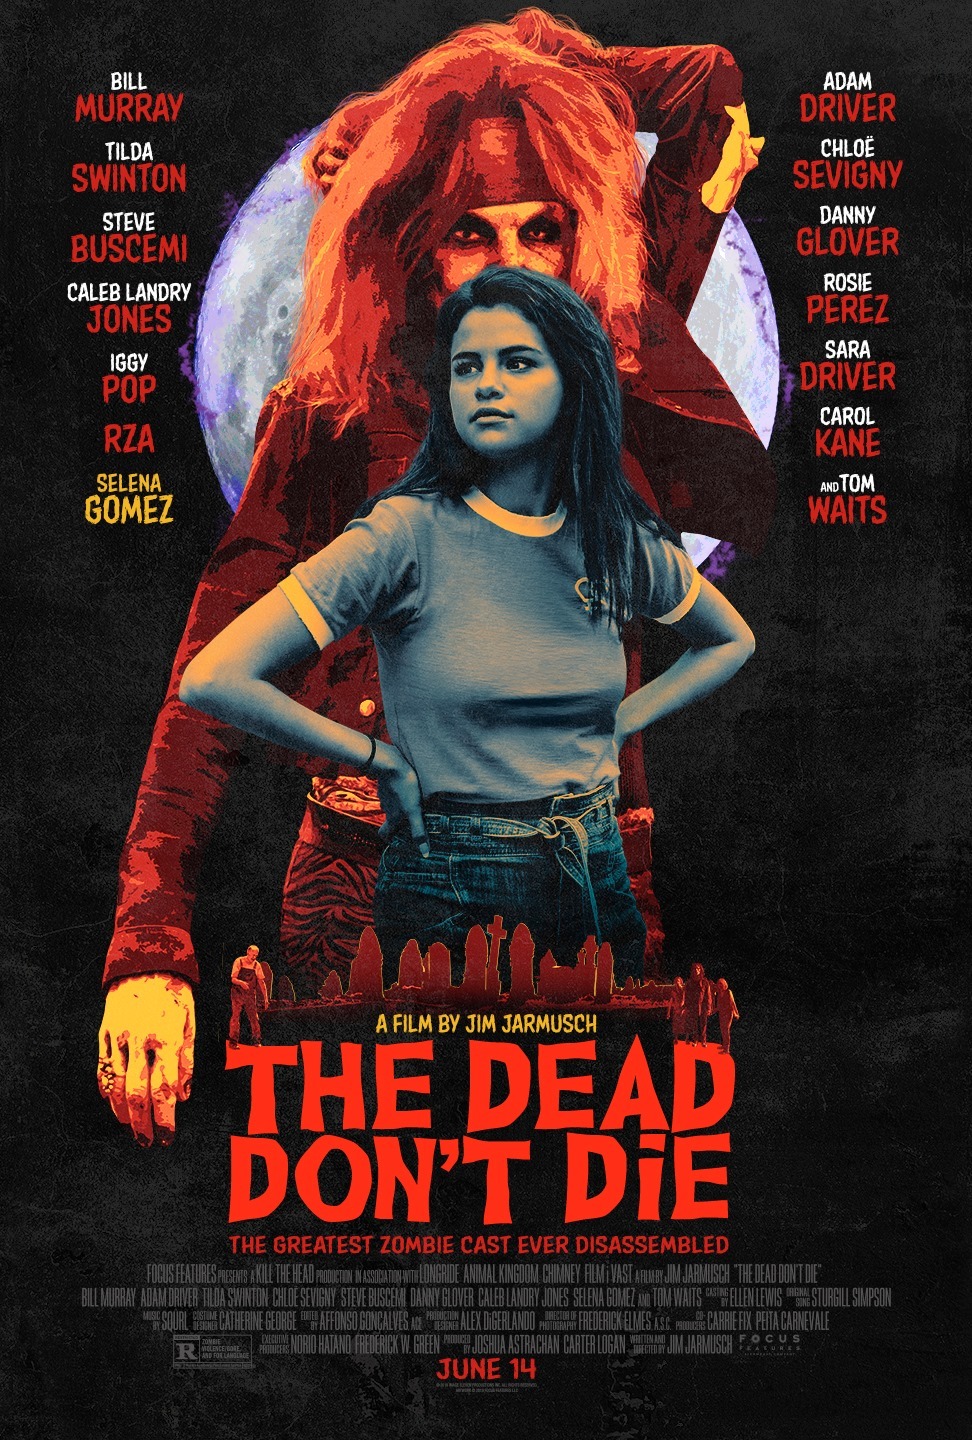 The Dead Don’t Die (Released in 2019)